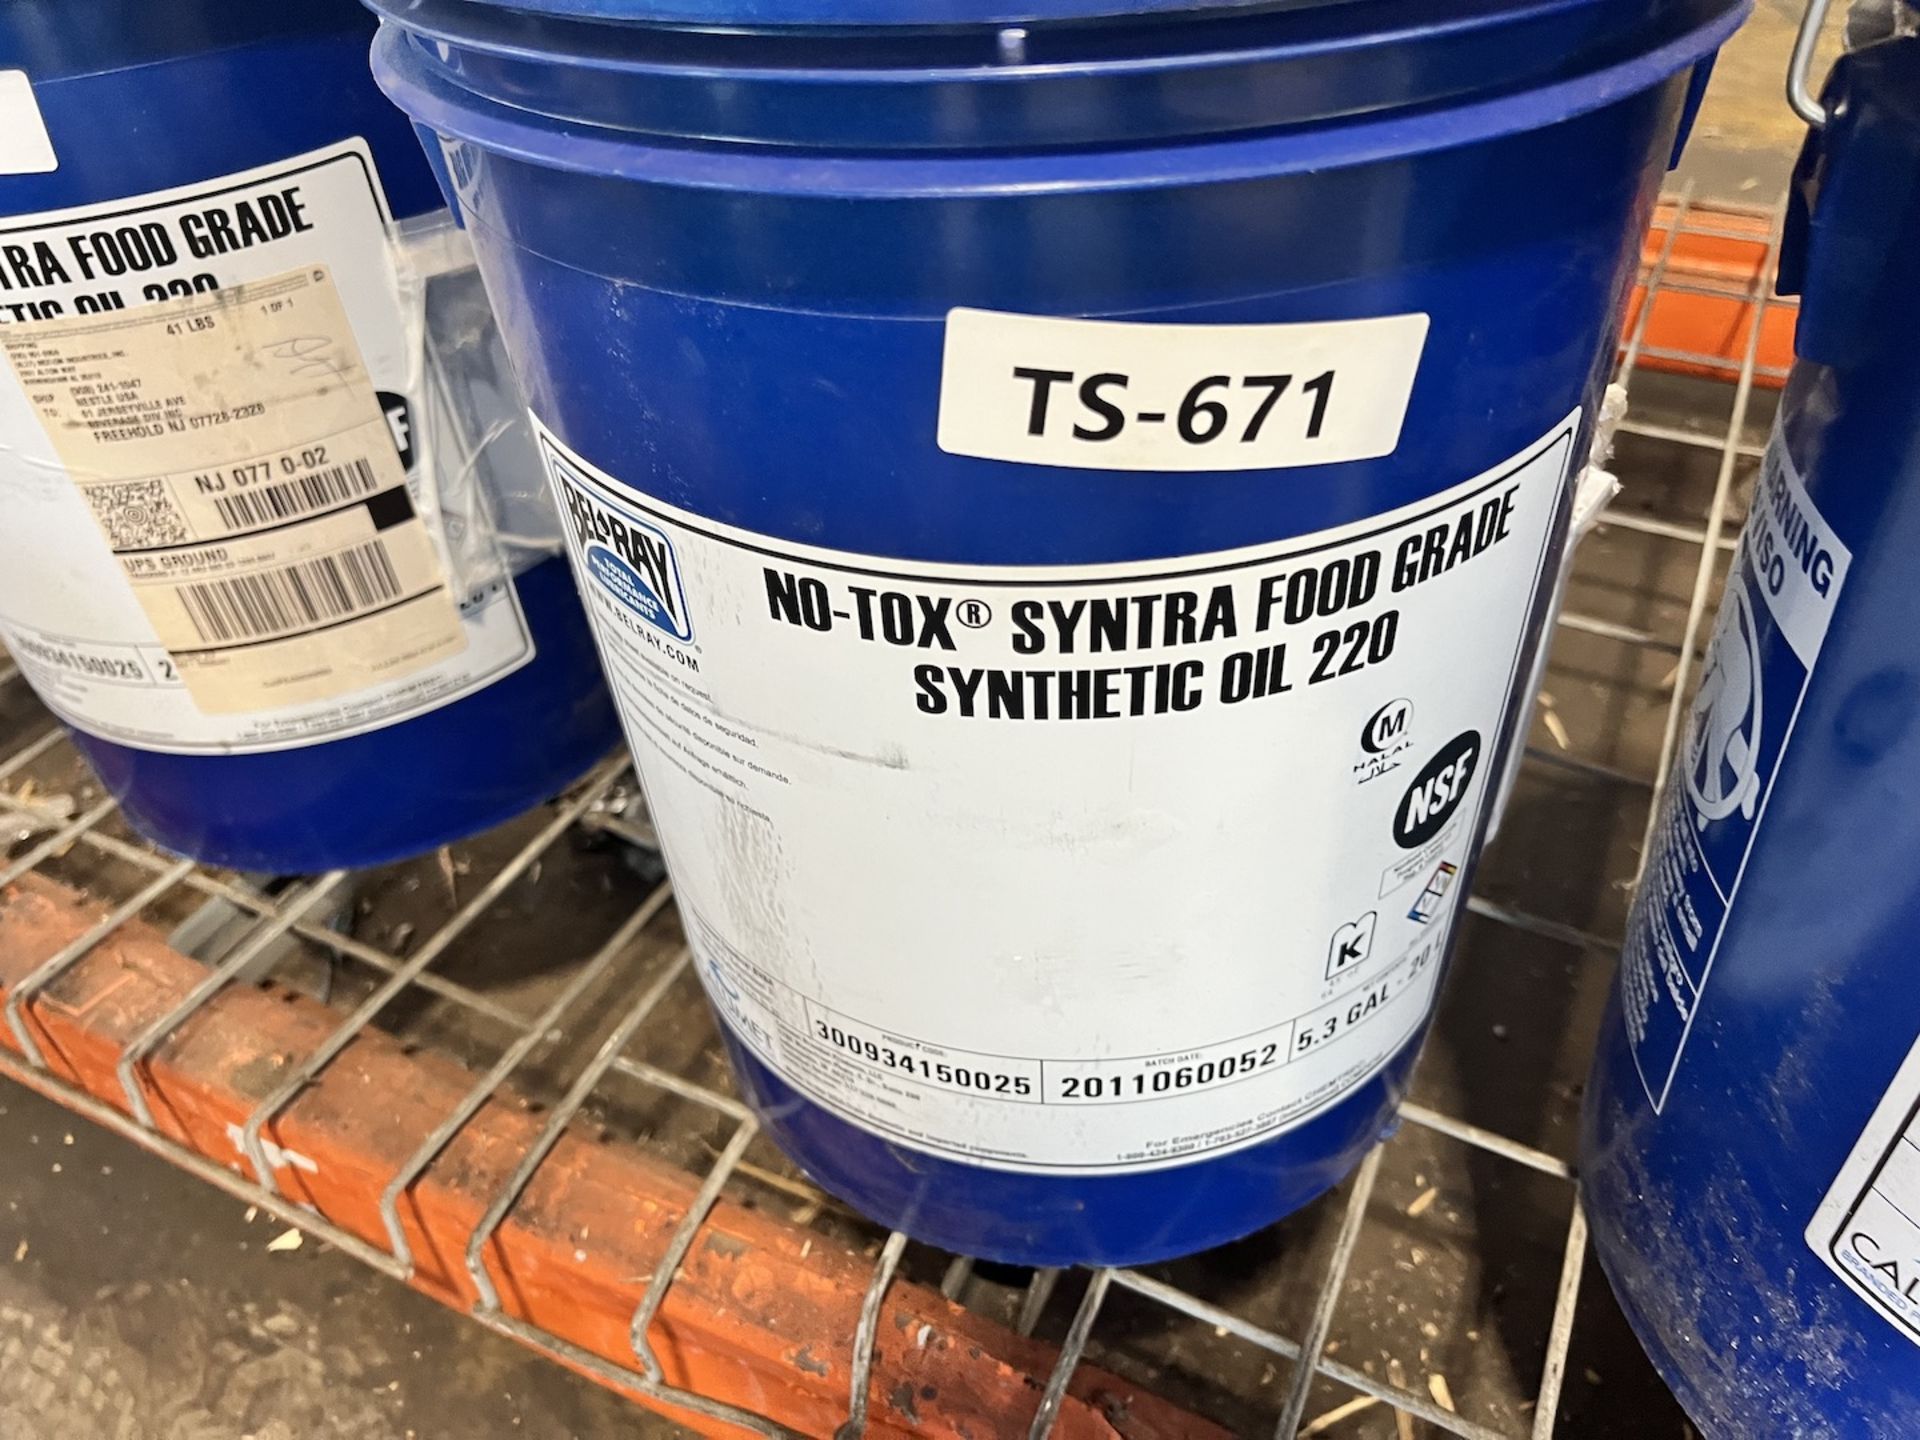 (4) Belray No Tox Synthetic Food Grade Oil 220, Product Code # 300934150025, 5 Gallon Pails - Image 4 of 5